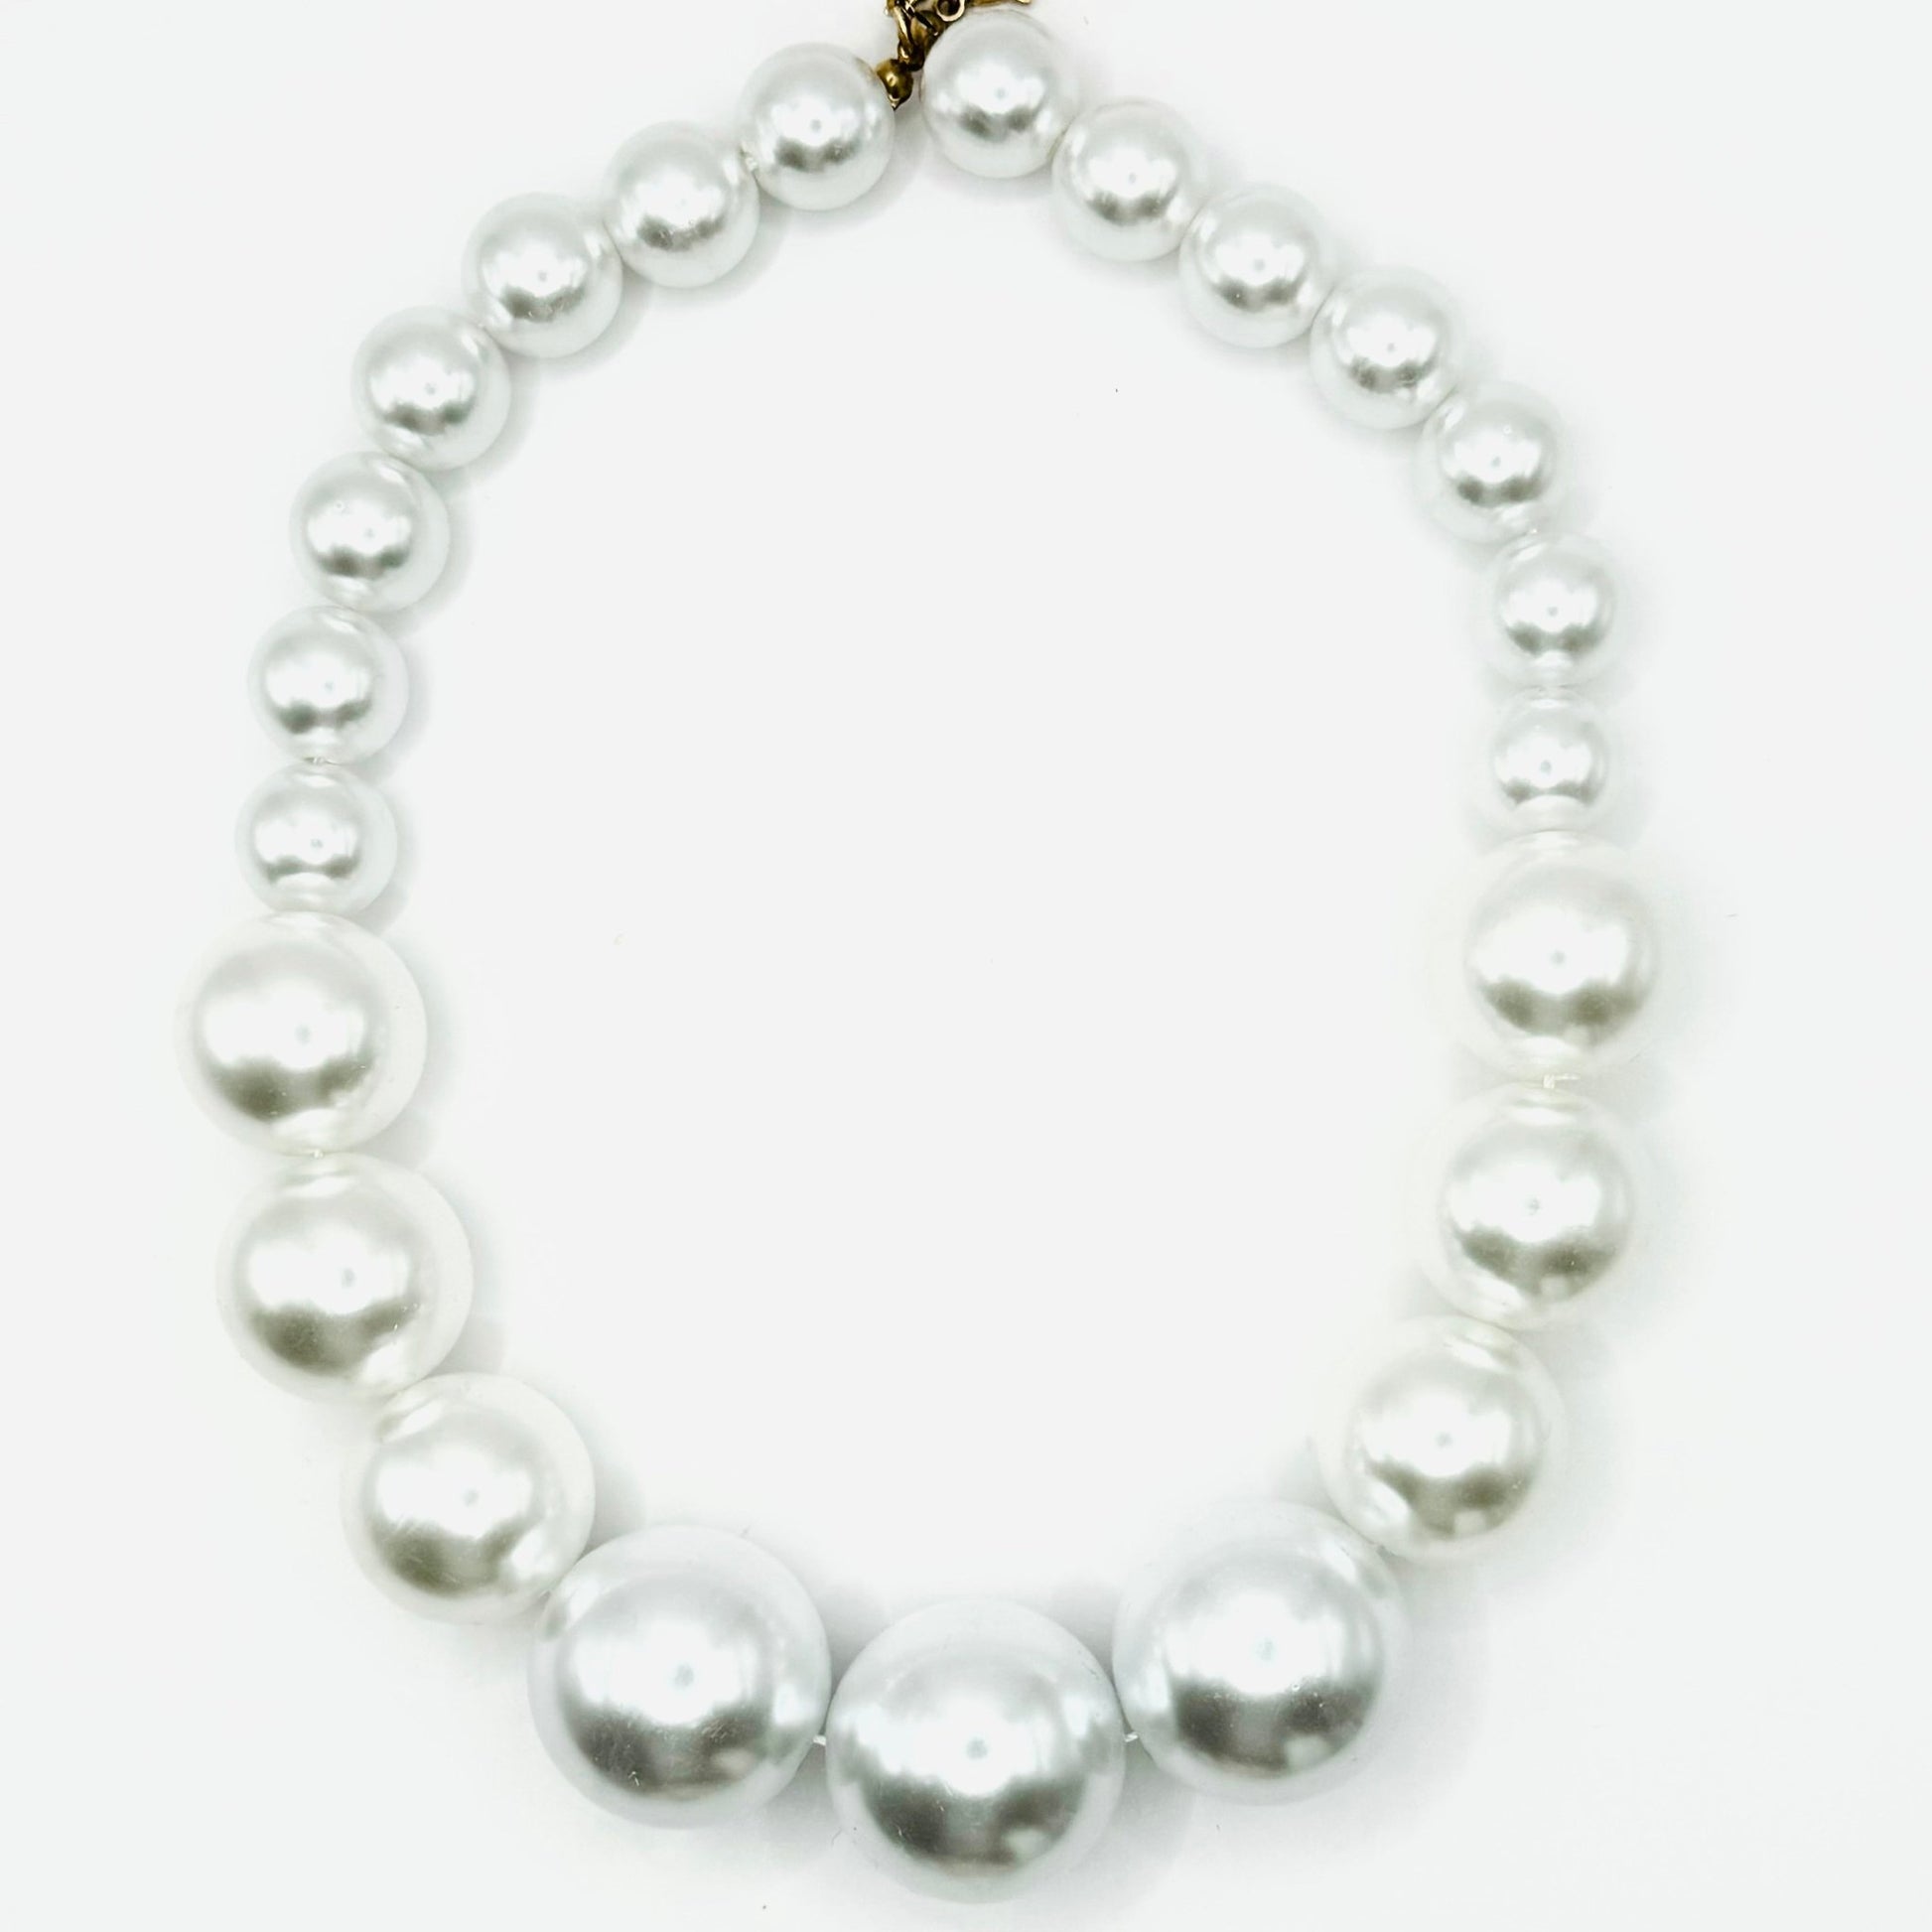 Pearls For The Girls Accessories - House of FaSHUN by Shun Melson